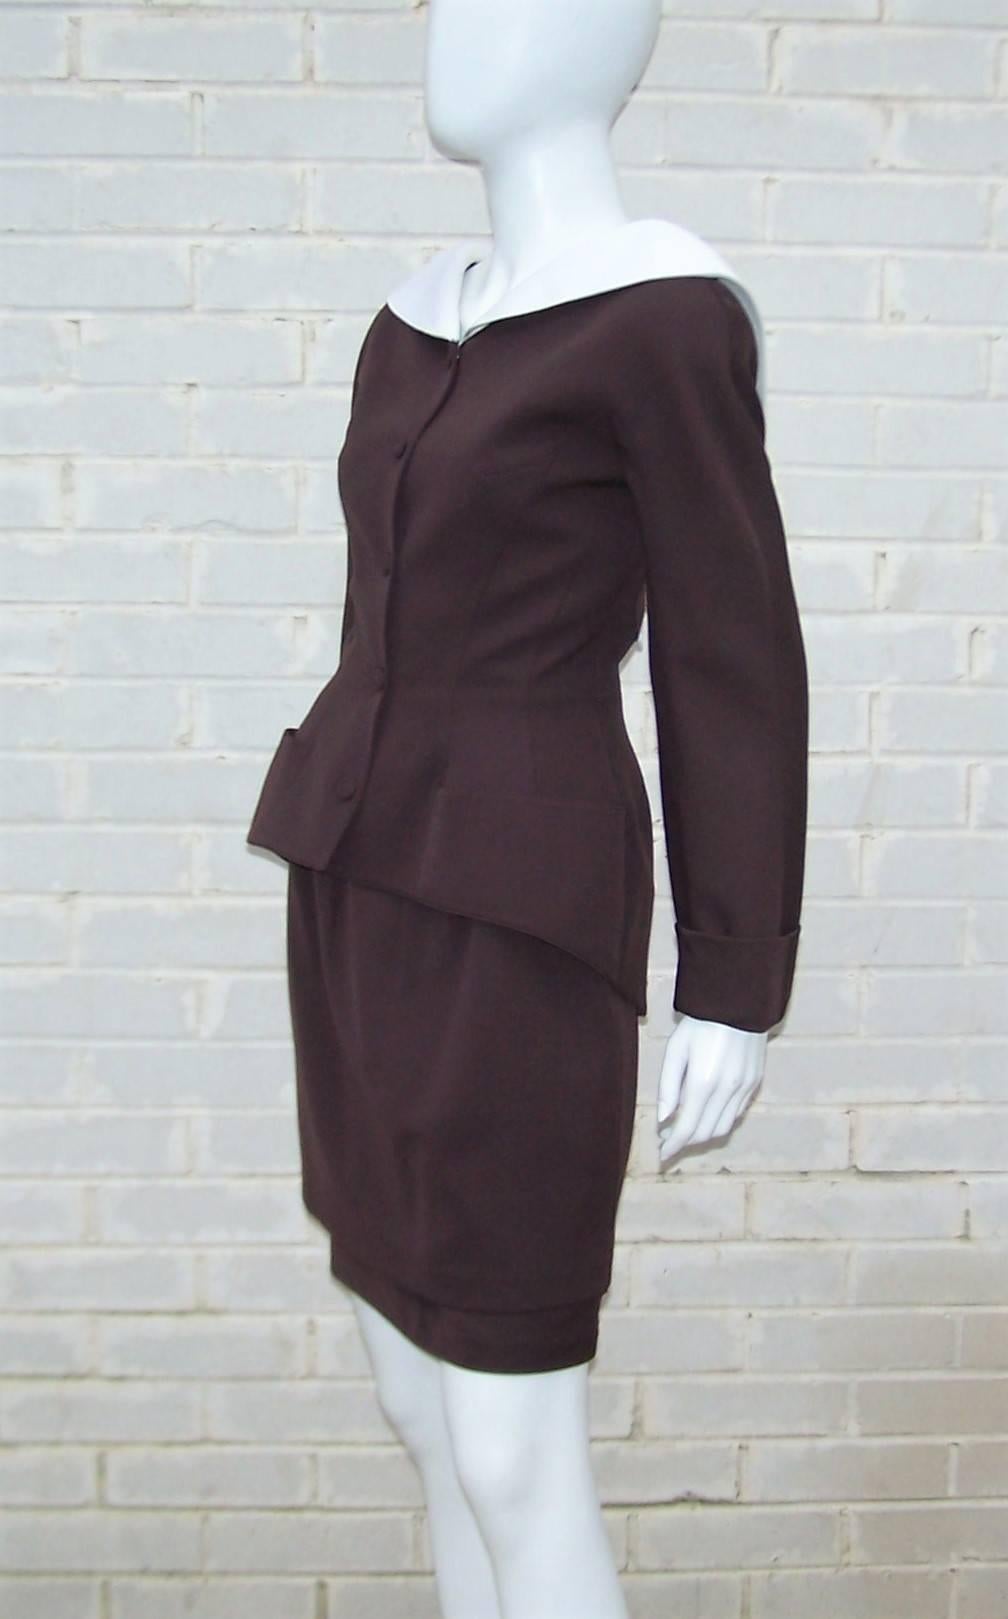 Attention to vintage style details with a unique futuristic silhouette are all hallmarks of French designer, Thierry Mugler.  This two piece suit is cut from a chocolate brown wool gabardine and accented with a white cotton pique portrait collar. 